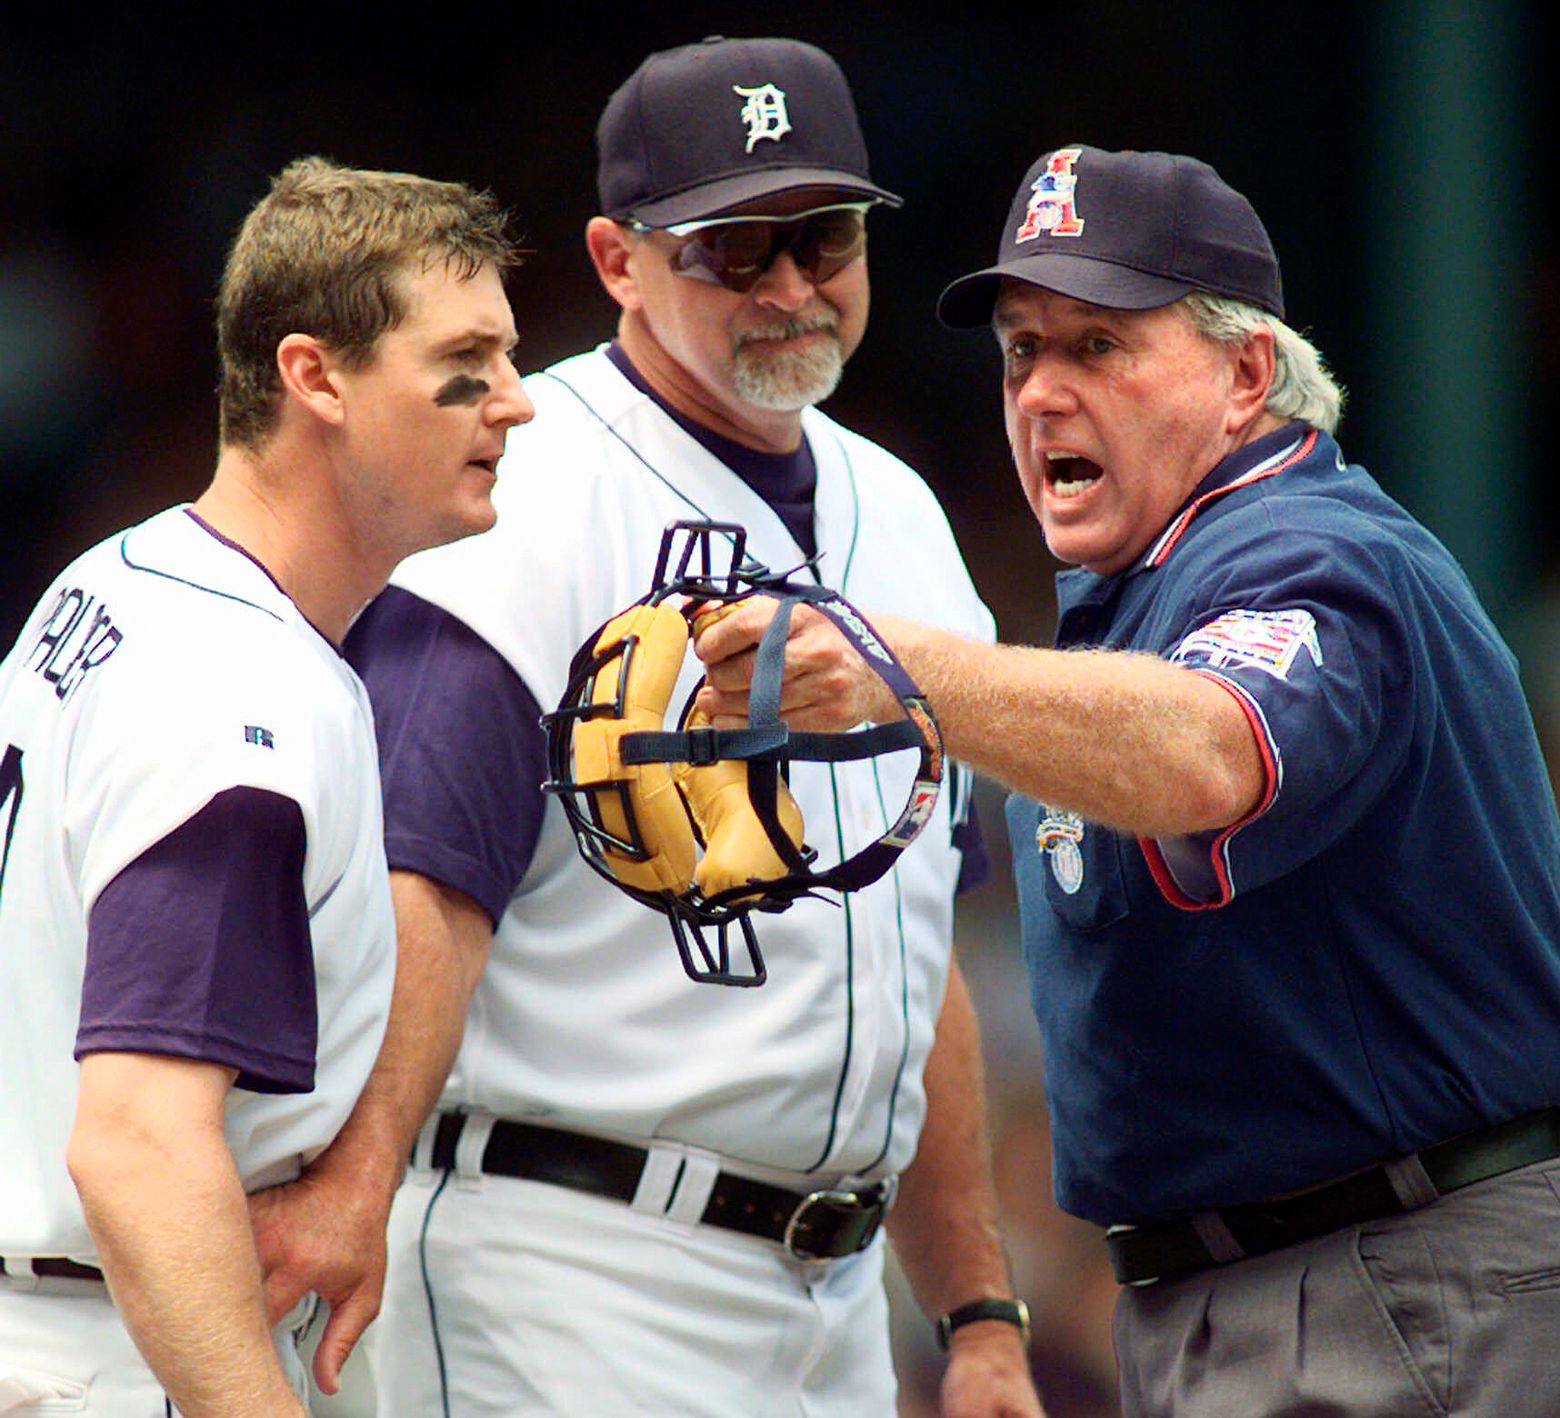 One local umpire, the father of a Major Leaguer, is doing his part